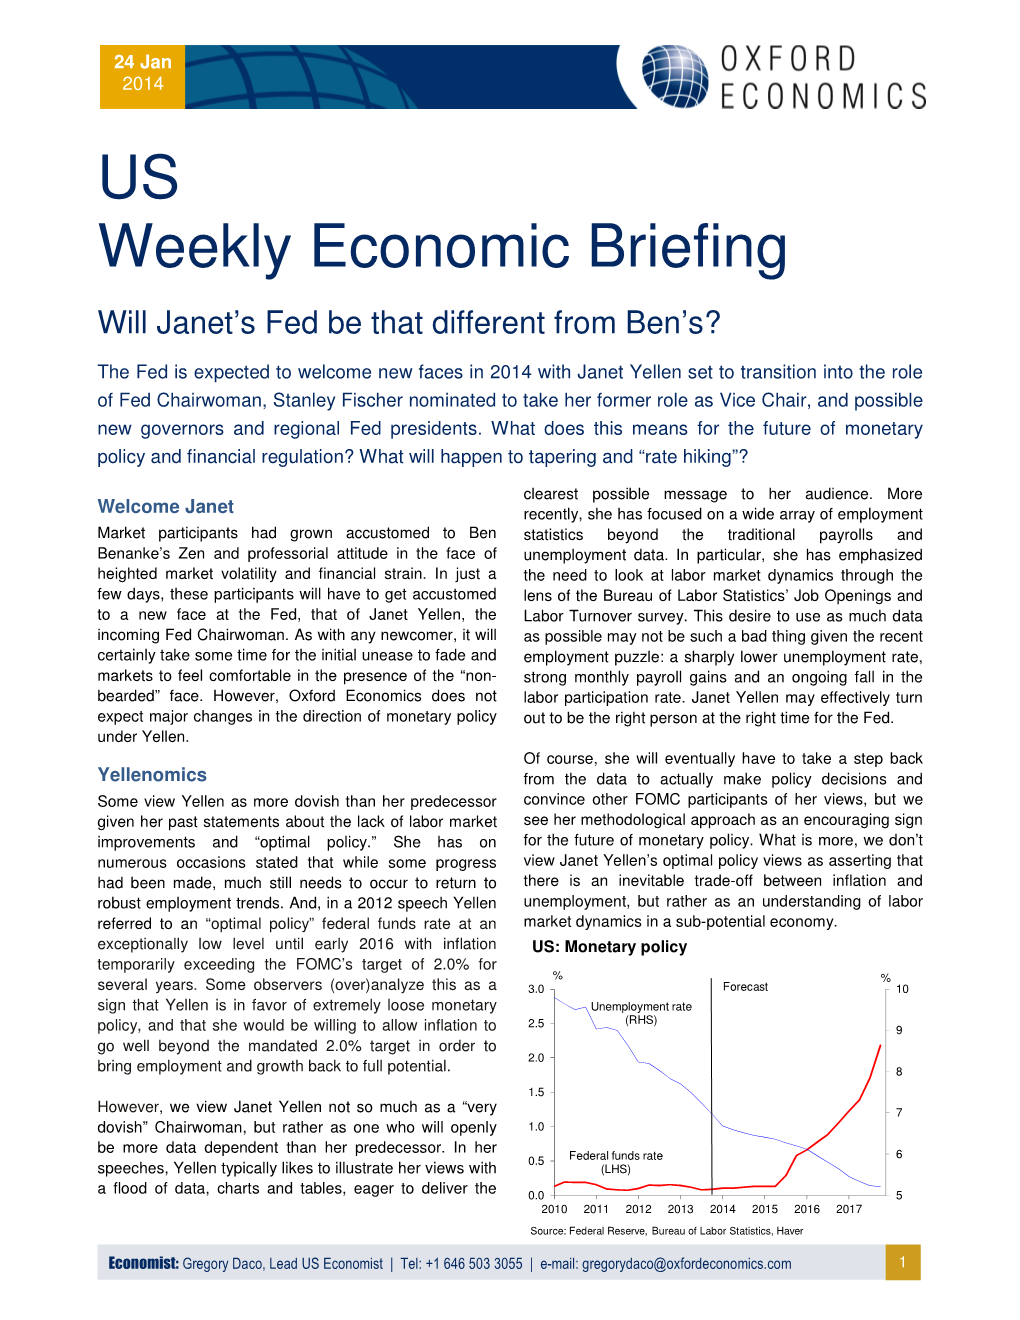 US Weekly Economic Briefing Will Janet’S Fed Be That Different from Ben’S?